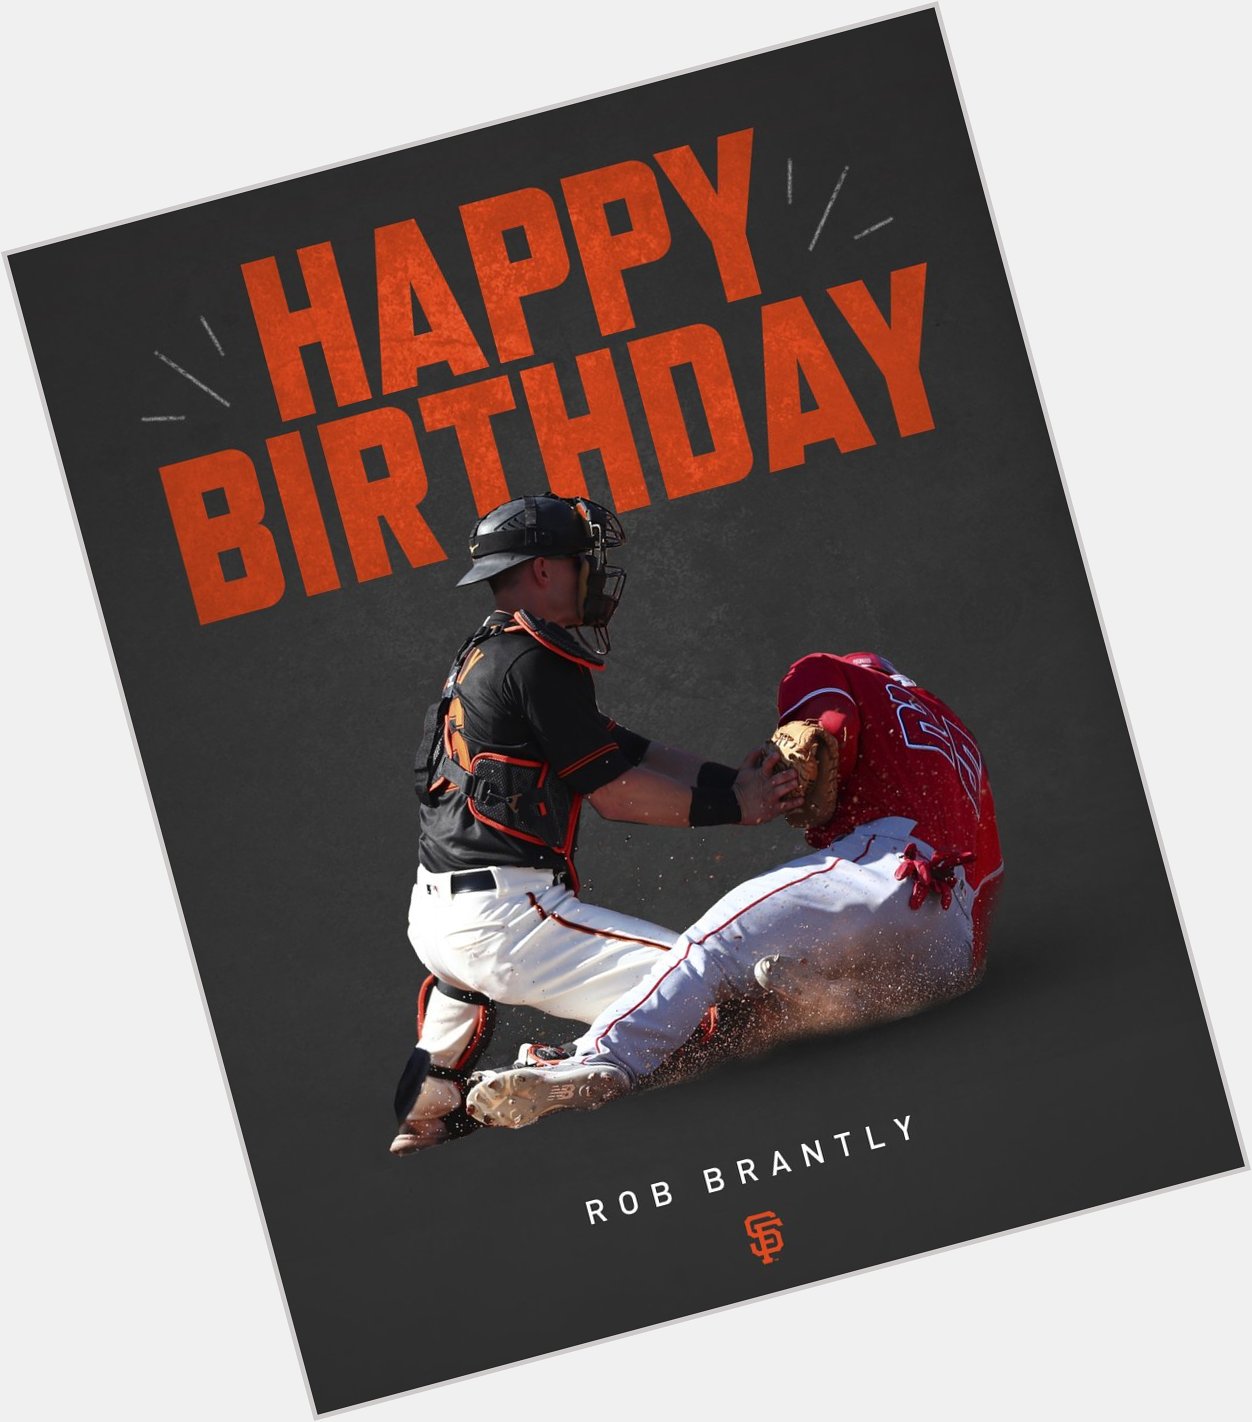 Also wishing a very Happy Birthday to Catcher Rob Brantly!  